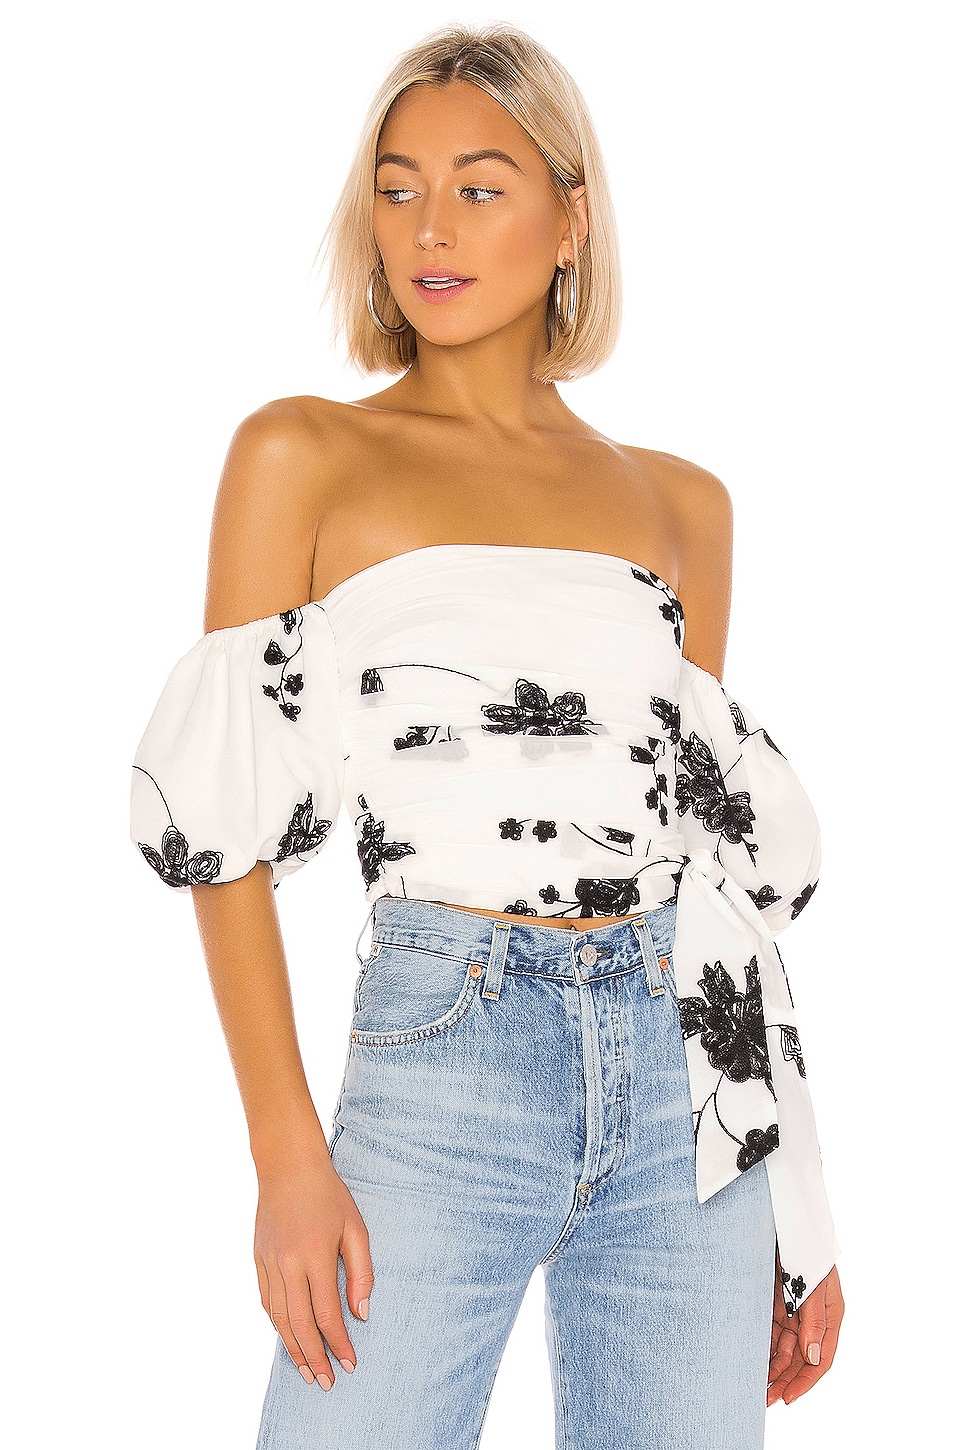 House of Harlow 1960 x REVOLVE Leya Embroidered Top White & Black